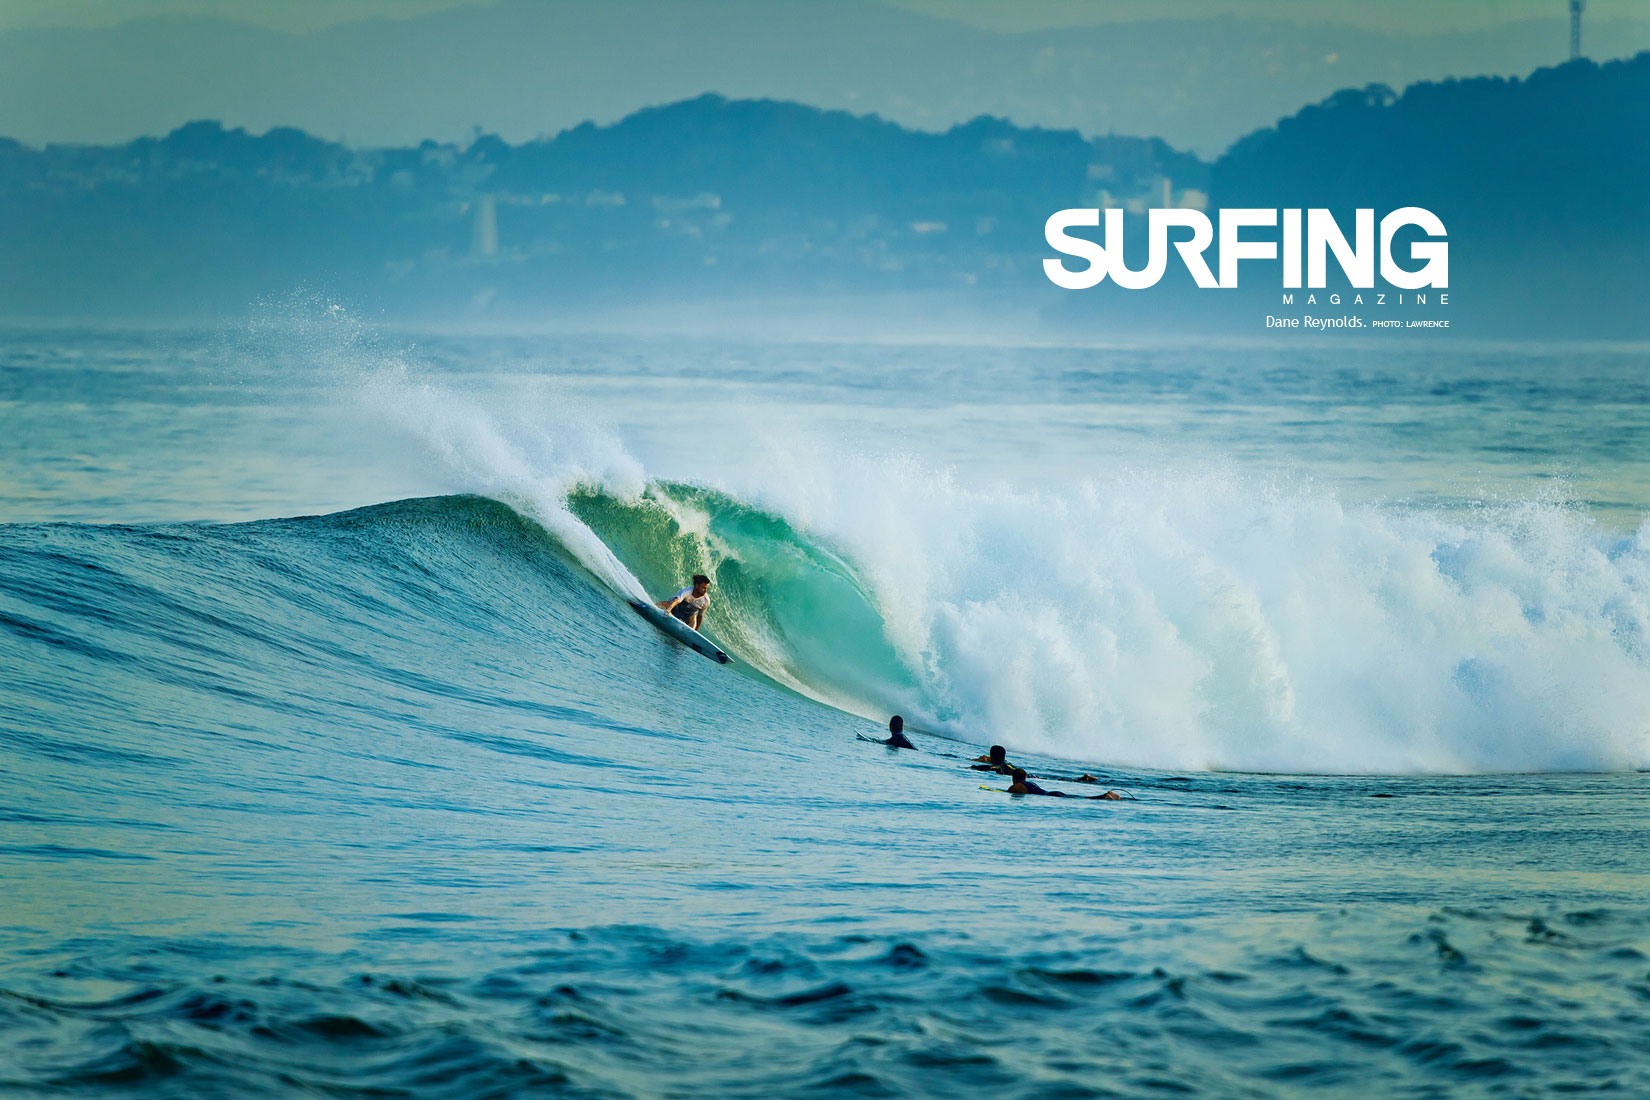 Dane Reynolds Surfing Mag Wallpaper The Mountain And Wave